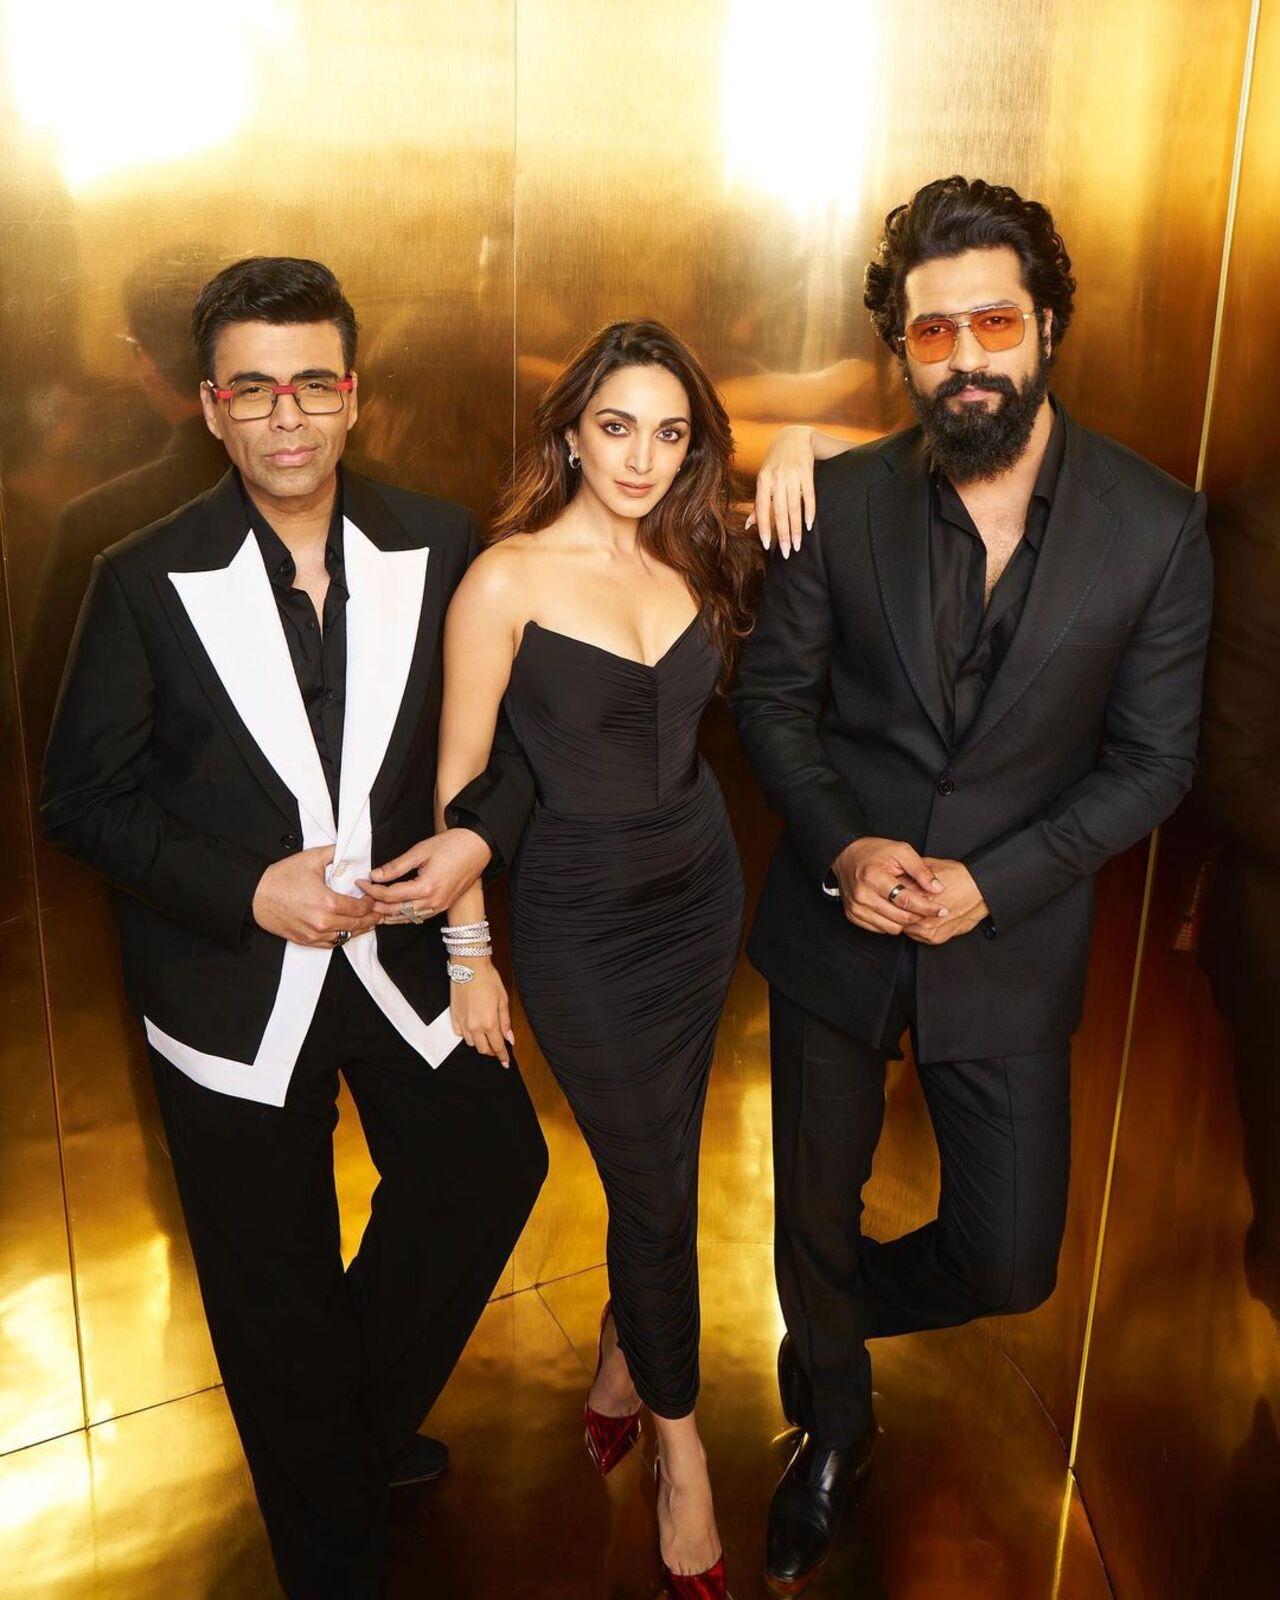 Kiara Advani won the rapid fire round with 52 percent vote while Vicky won the quiz round